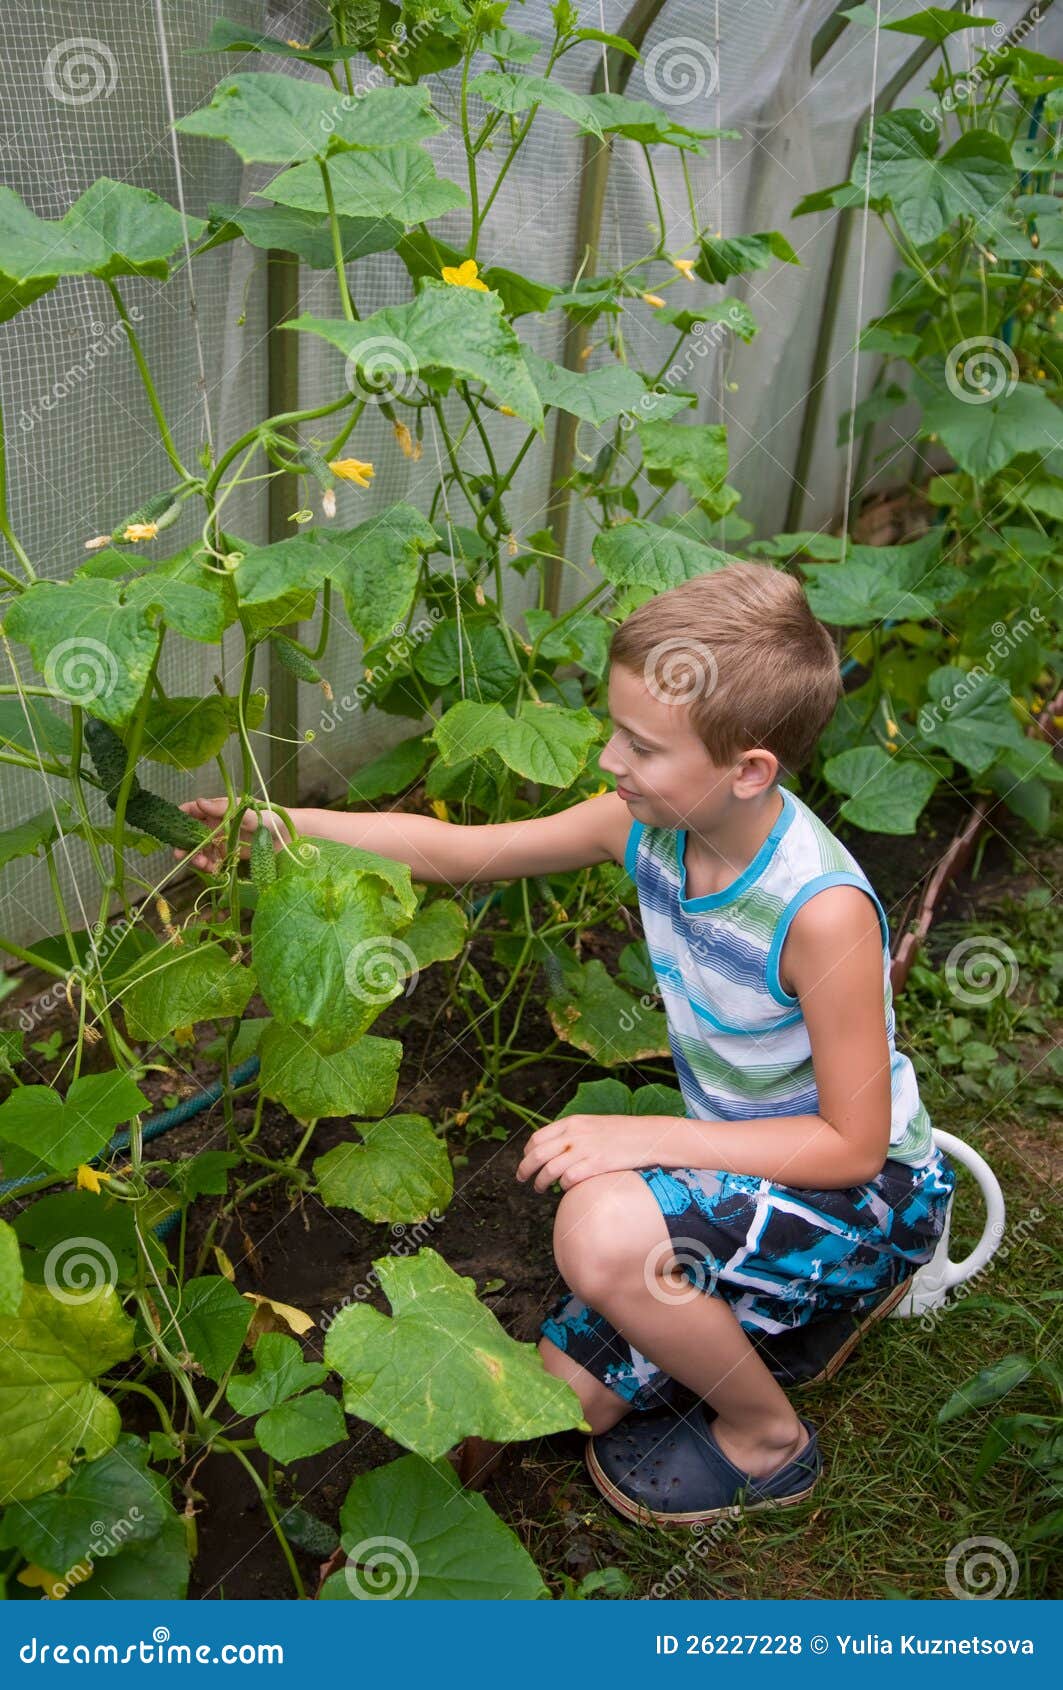 young boy in hothouse